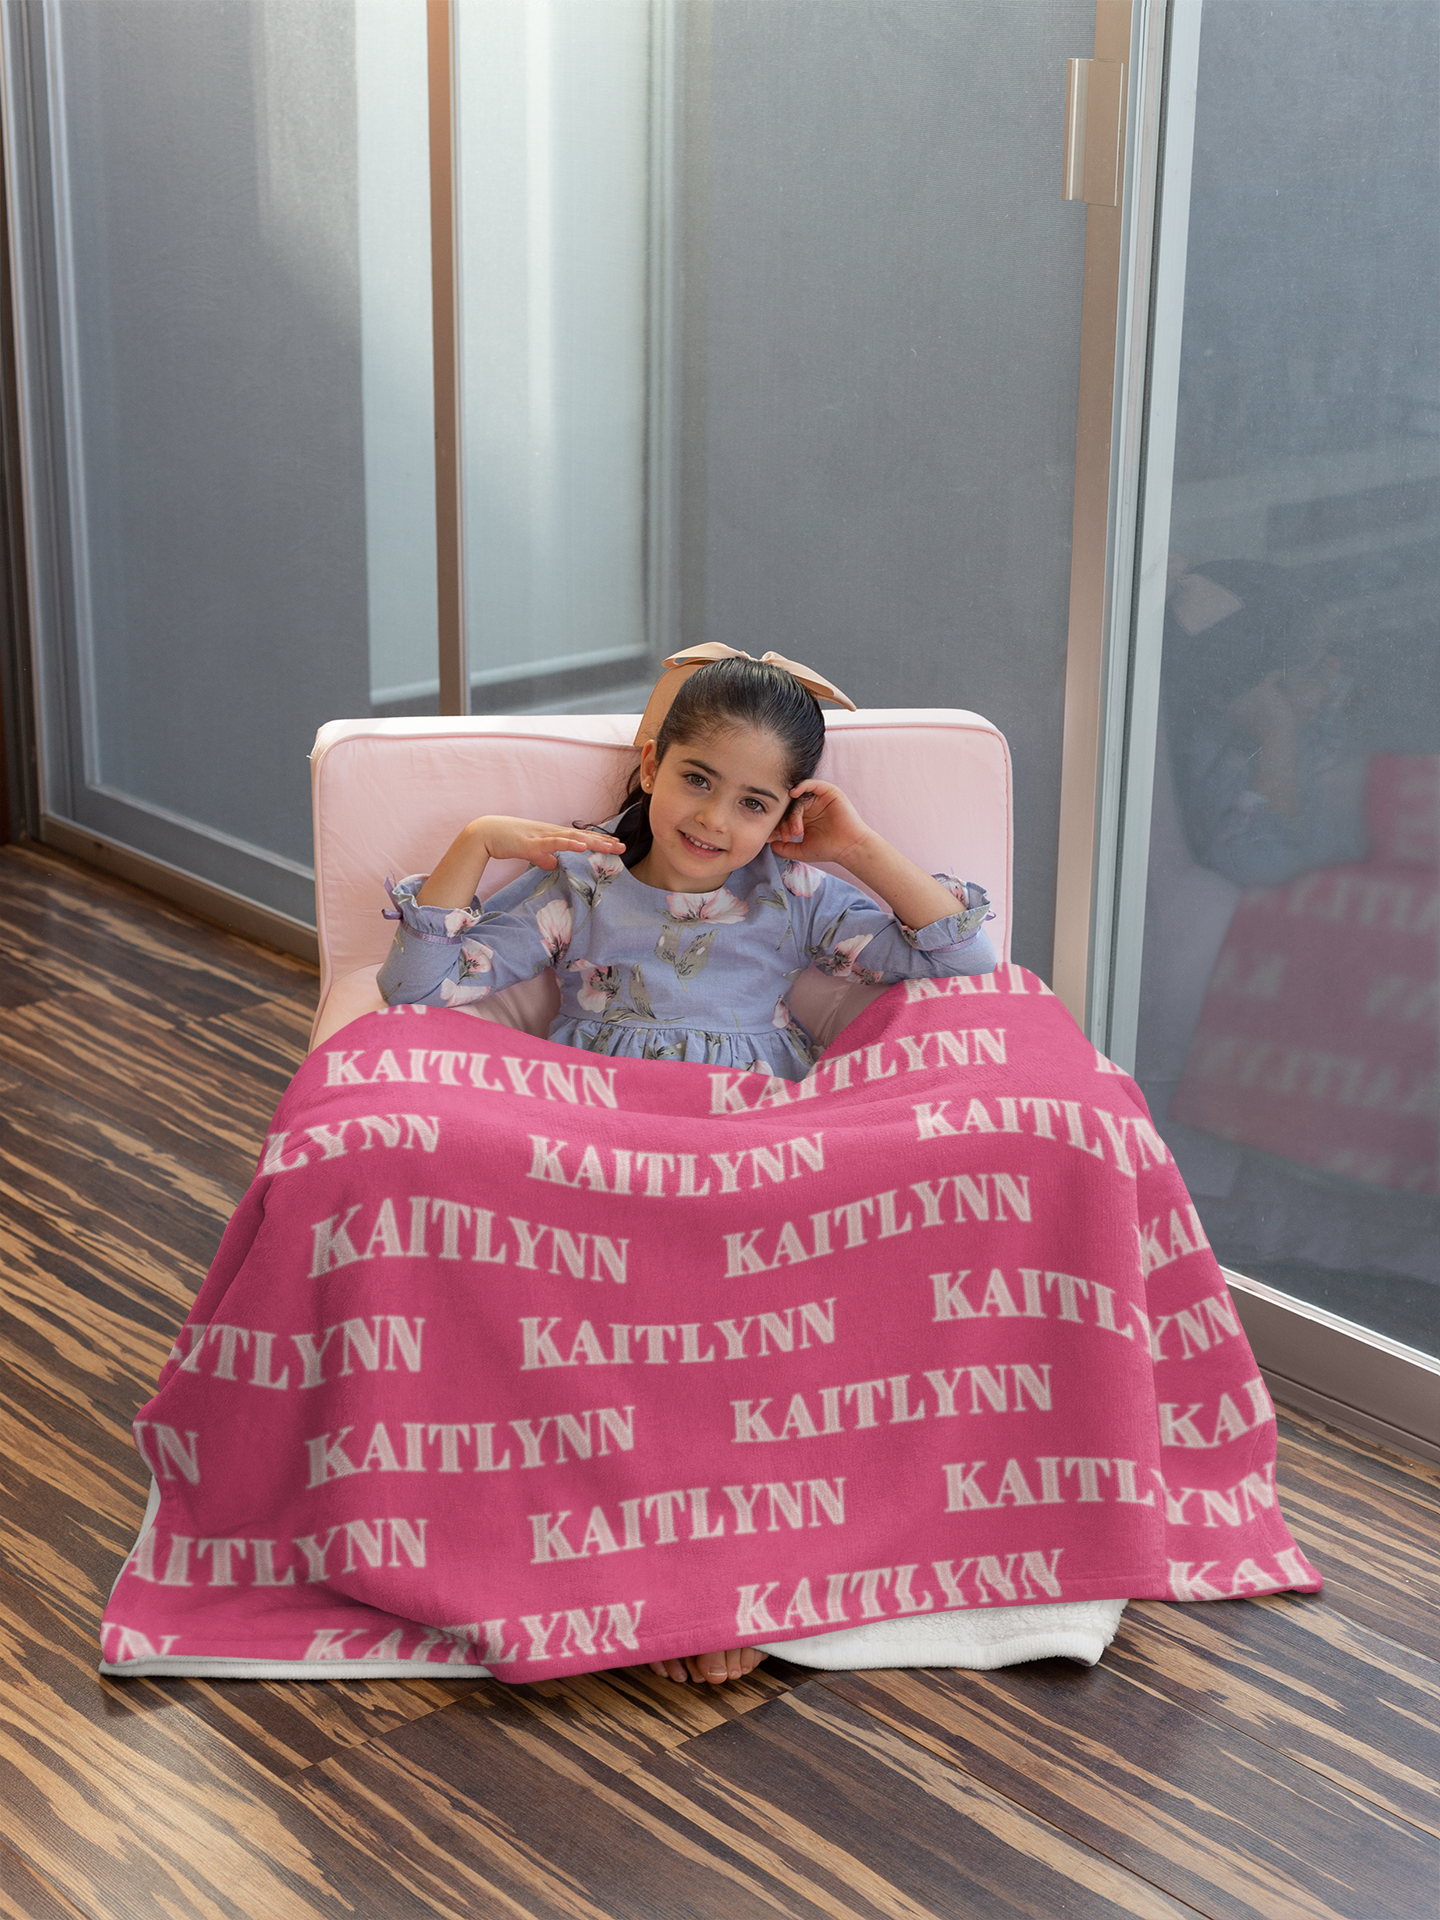 Custom Name Blanket: Personalized Throw in 50"x60" or 60"x80" with Your Choice of 12 Vibrant Colors | Ideal Gift for Boys, Girls, and Adults - Canadohta Custom Creations LLC